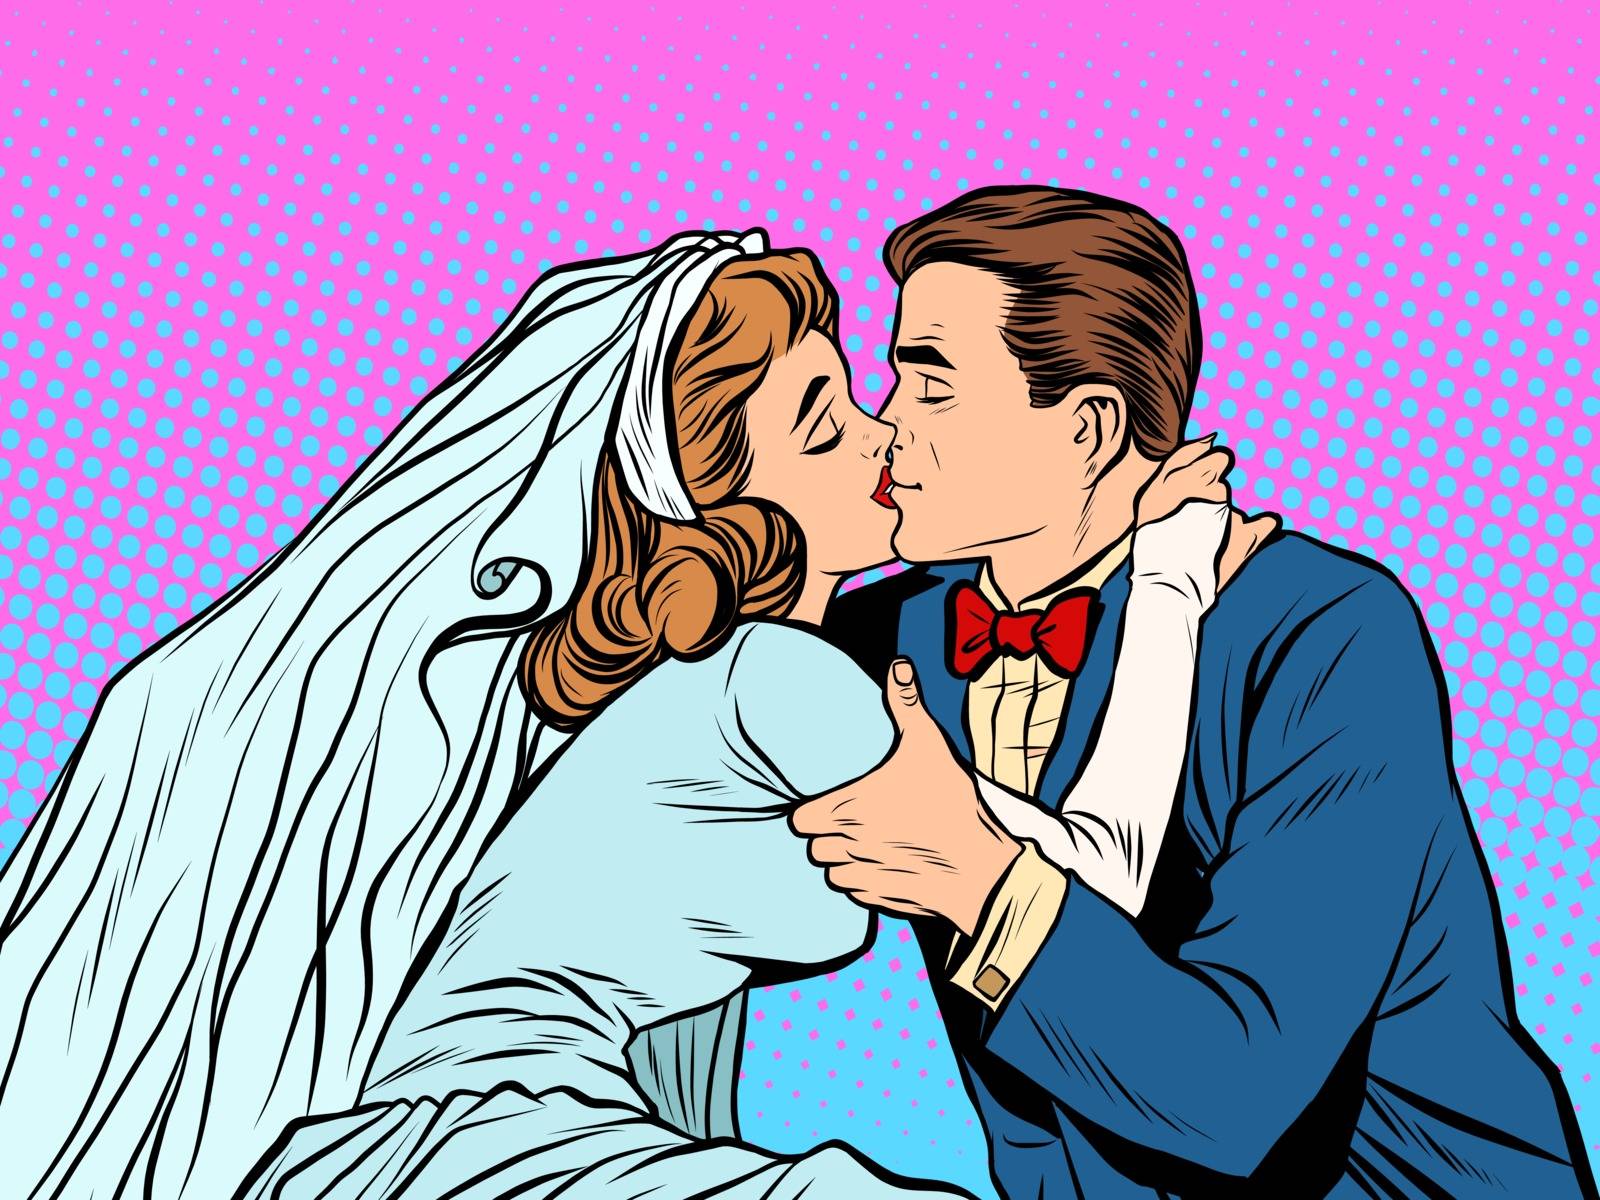 The bride and groom kiss pop art retro style. Man and woman at the wedding. Love couple